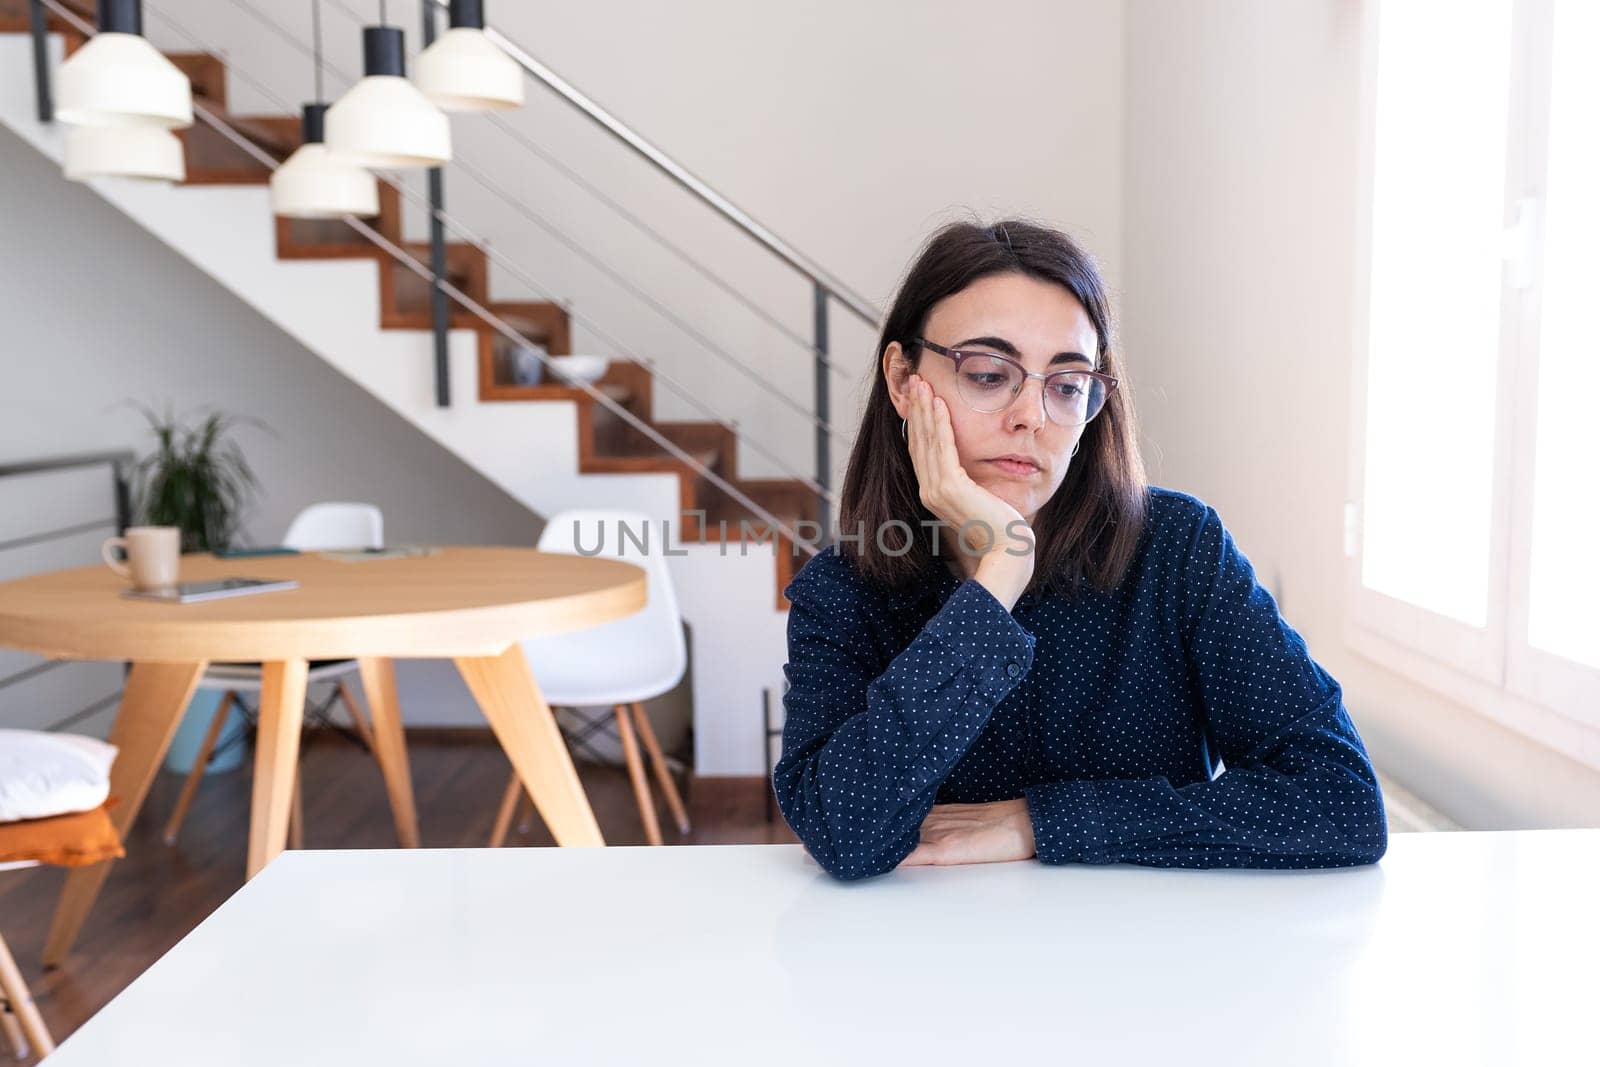 Pensive young caucasian woman with glasses feeling bored sitting at home office desk. Lifestyle concept.